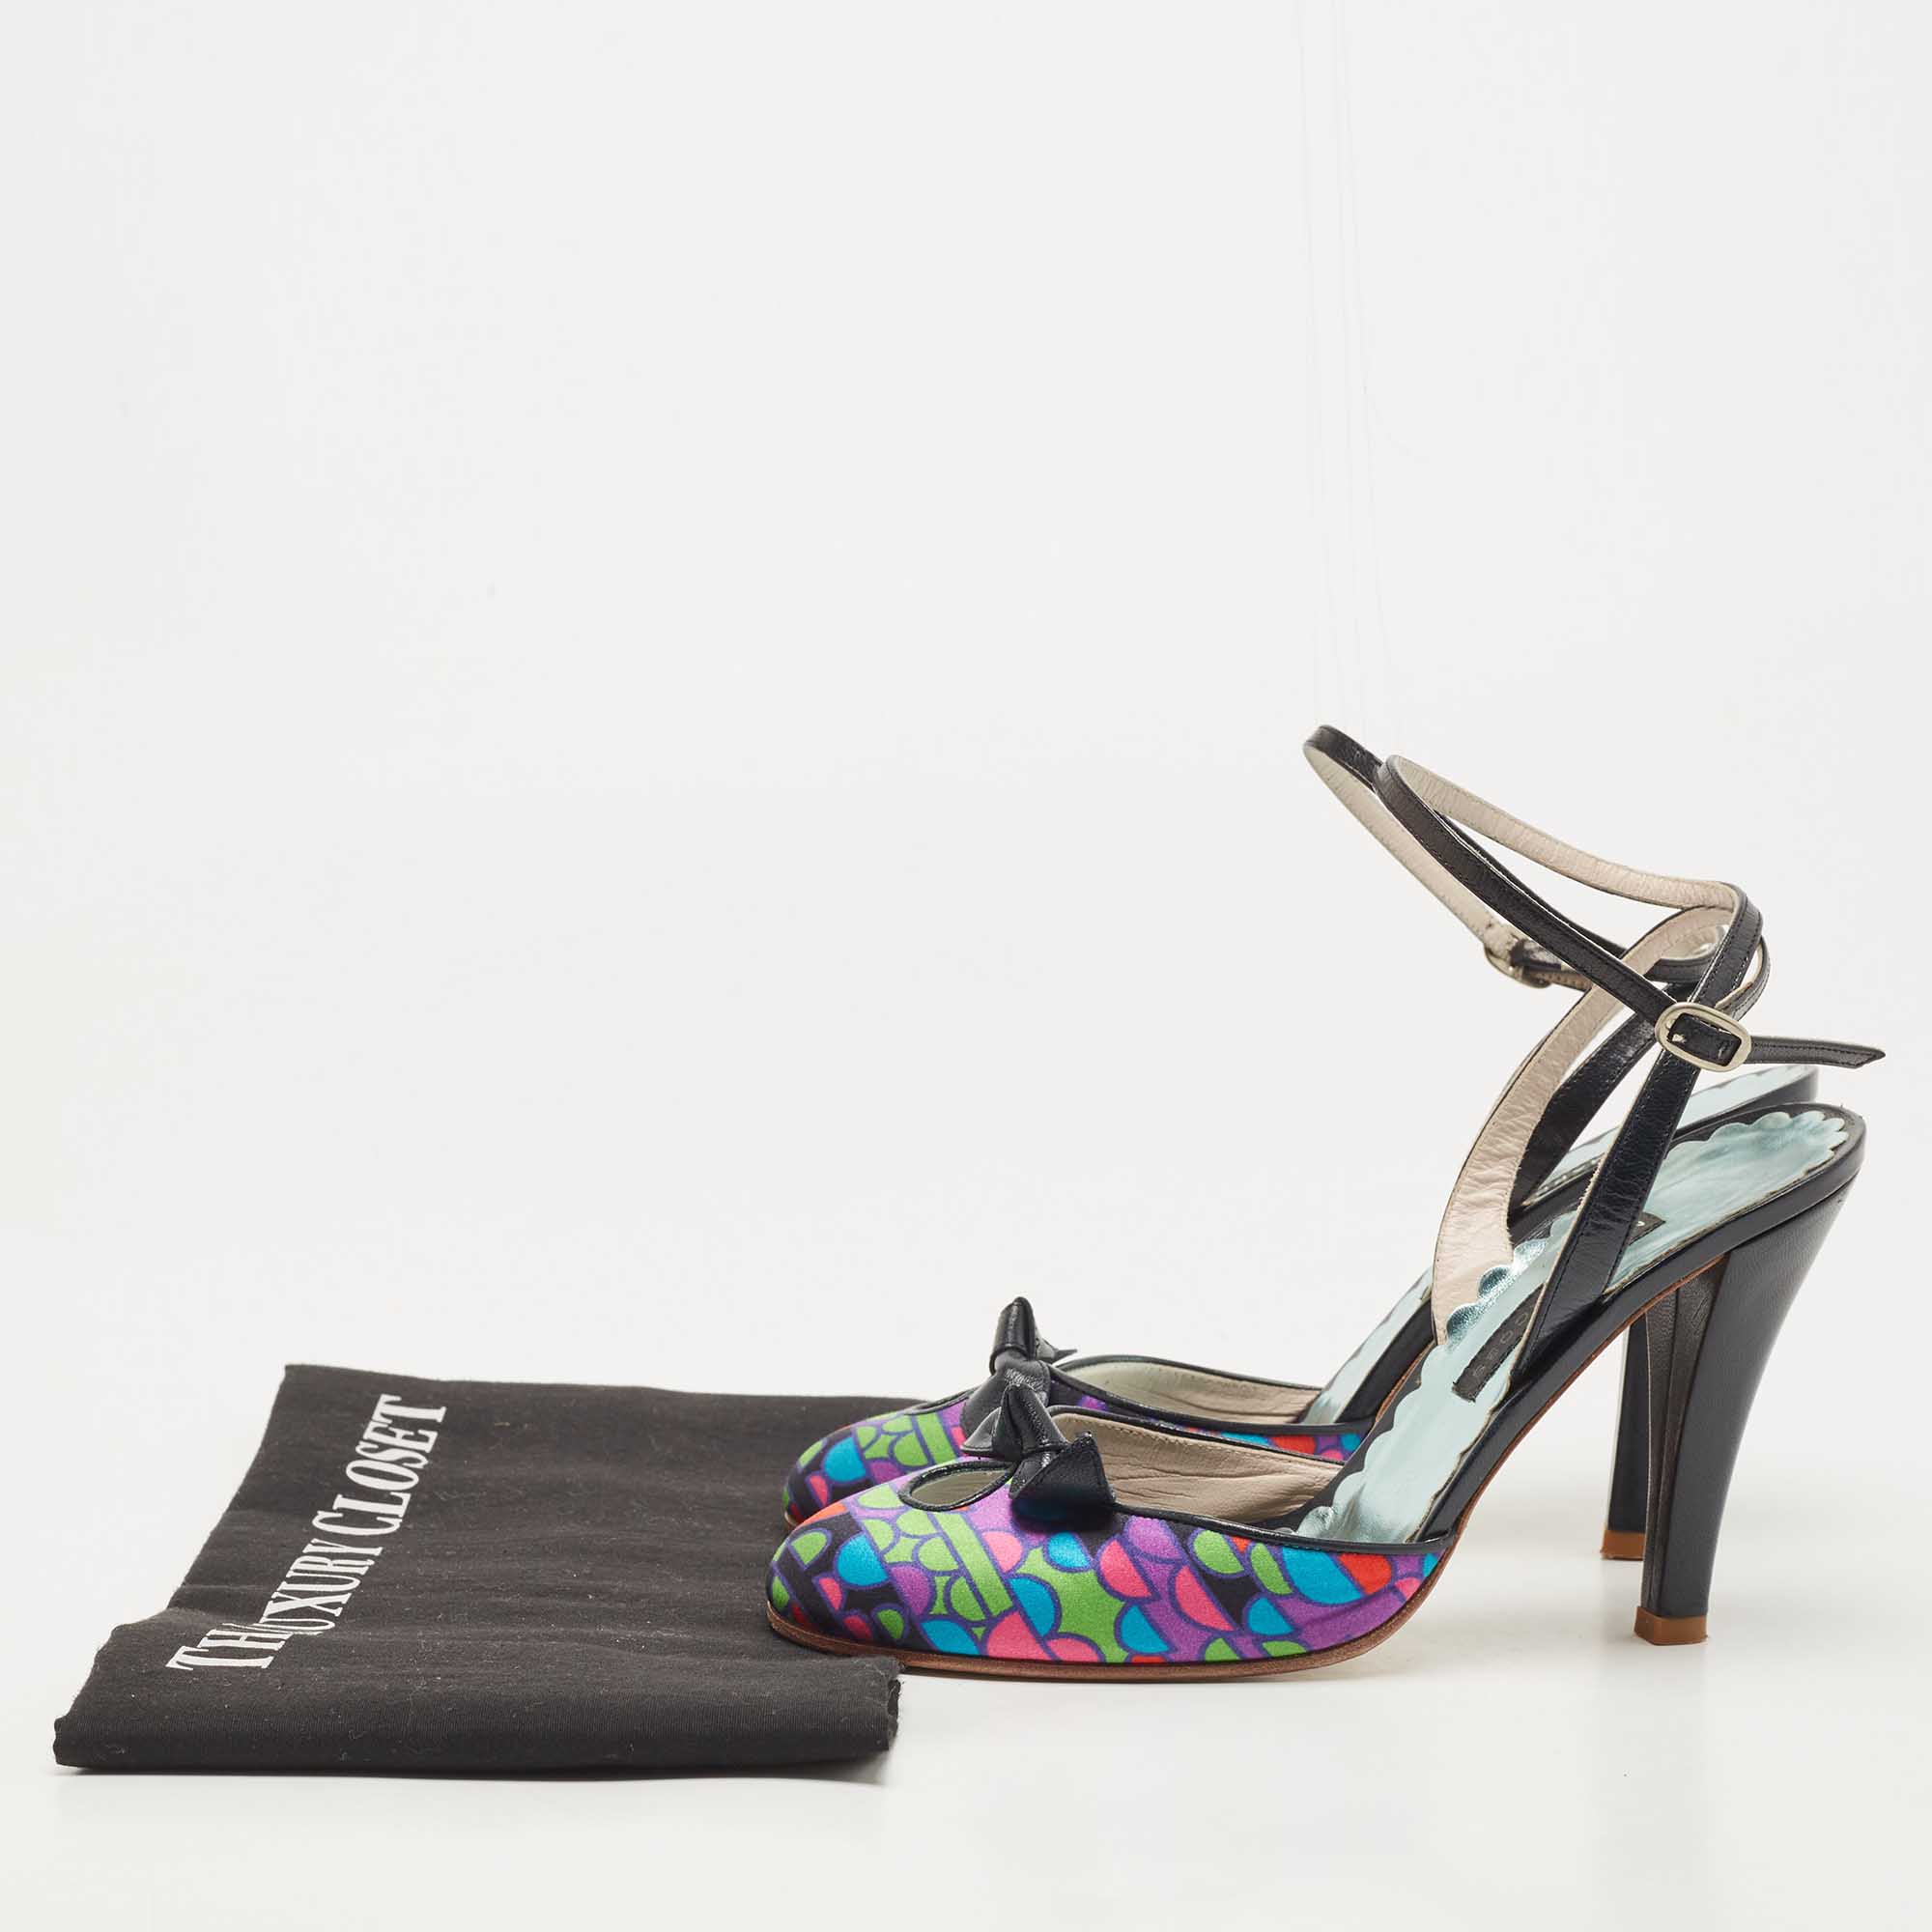 Marc Jacobs Multicolor Printed Satin And Leather Ankle Strap Sandals Size 37.5